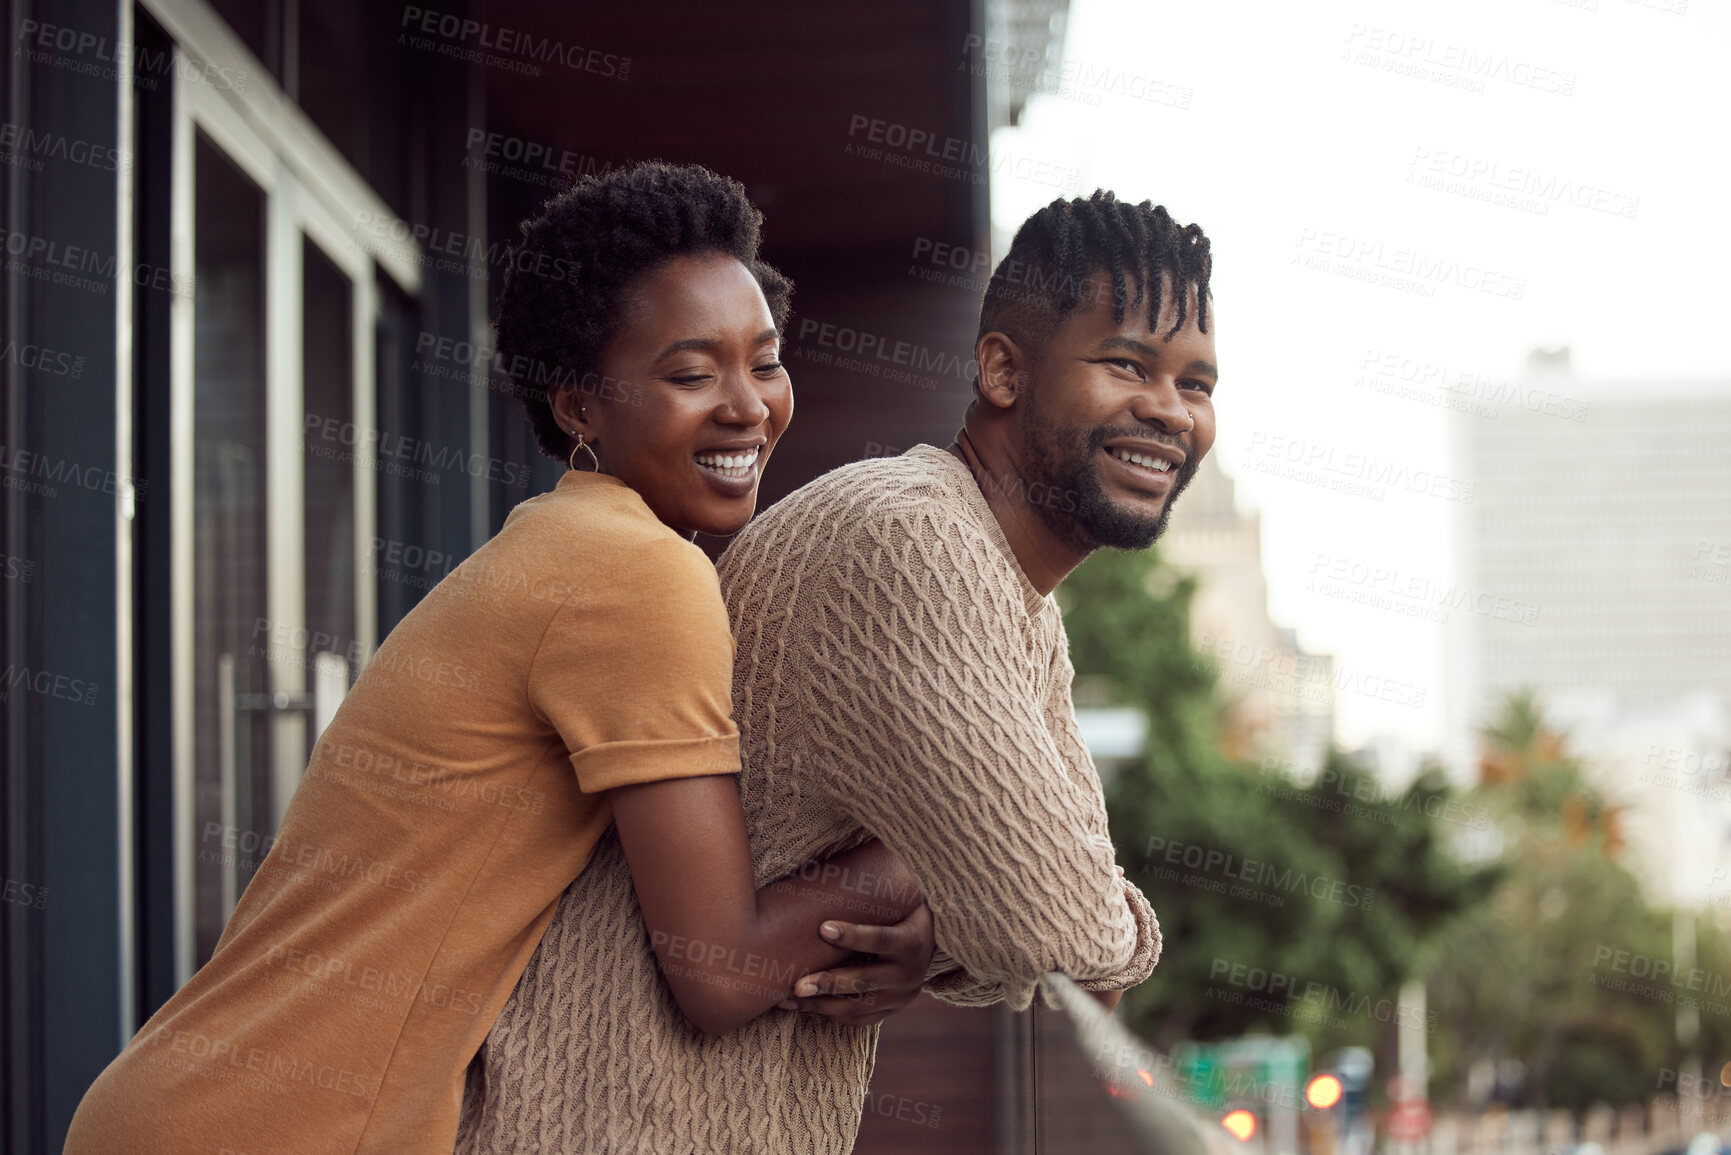 Buy stock photo Smile, balcony or black couple hug to relax in villa on holiday vacation together with home, support or view. Happy, city or romantic man with African woman with care, commitment or love in marriage